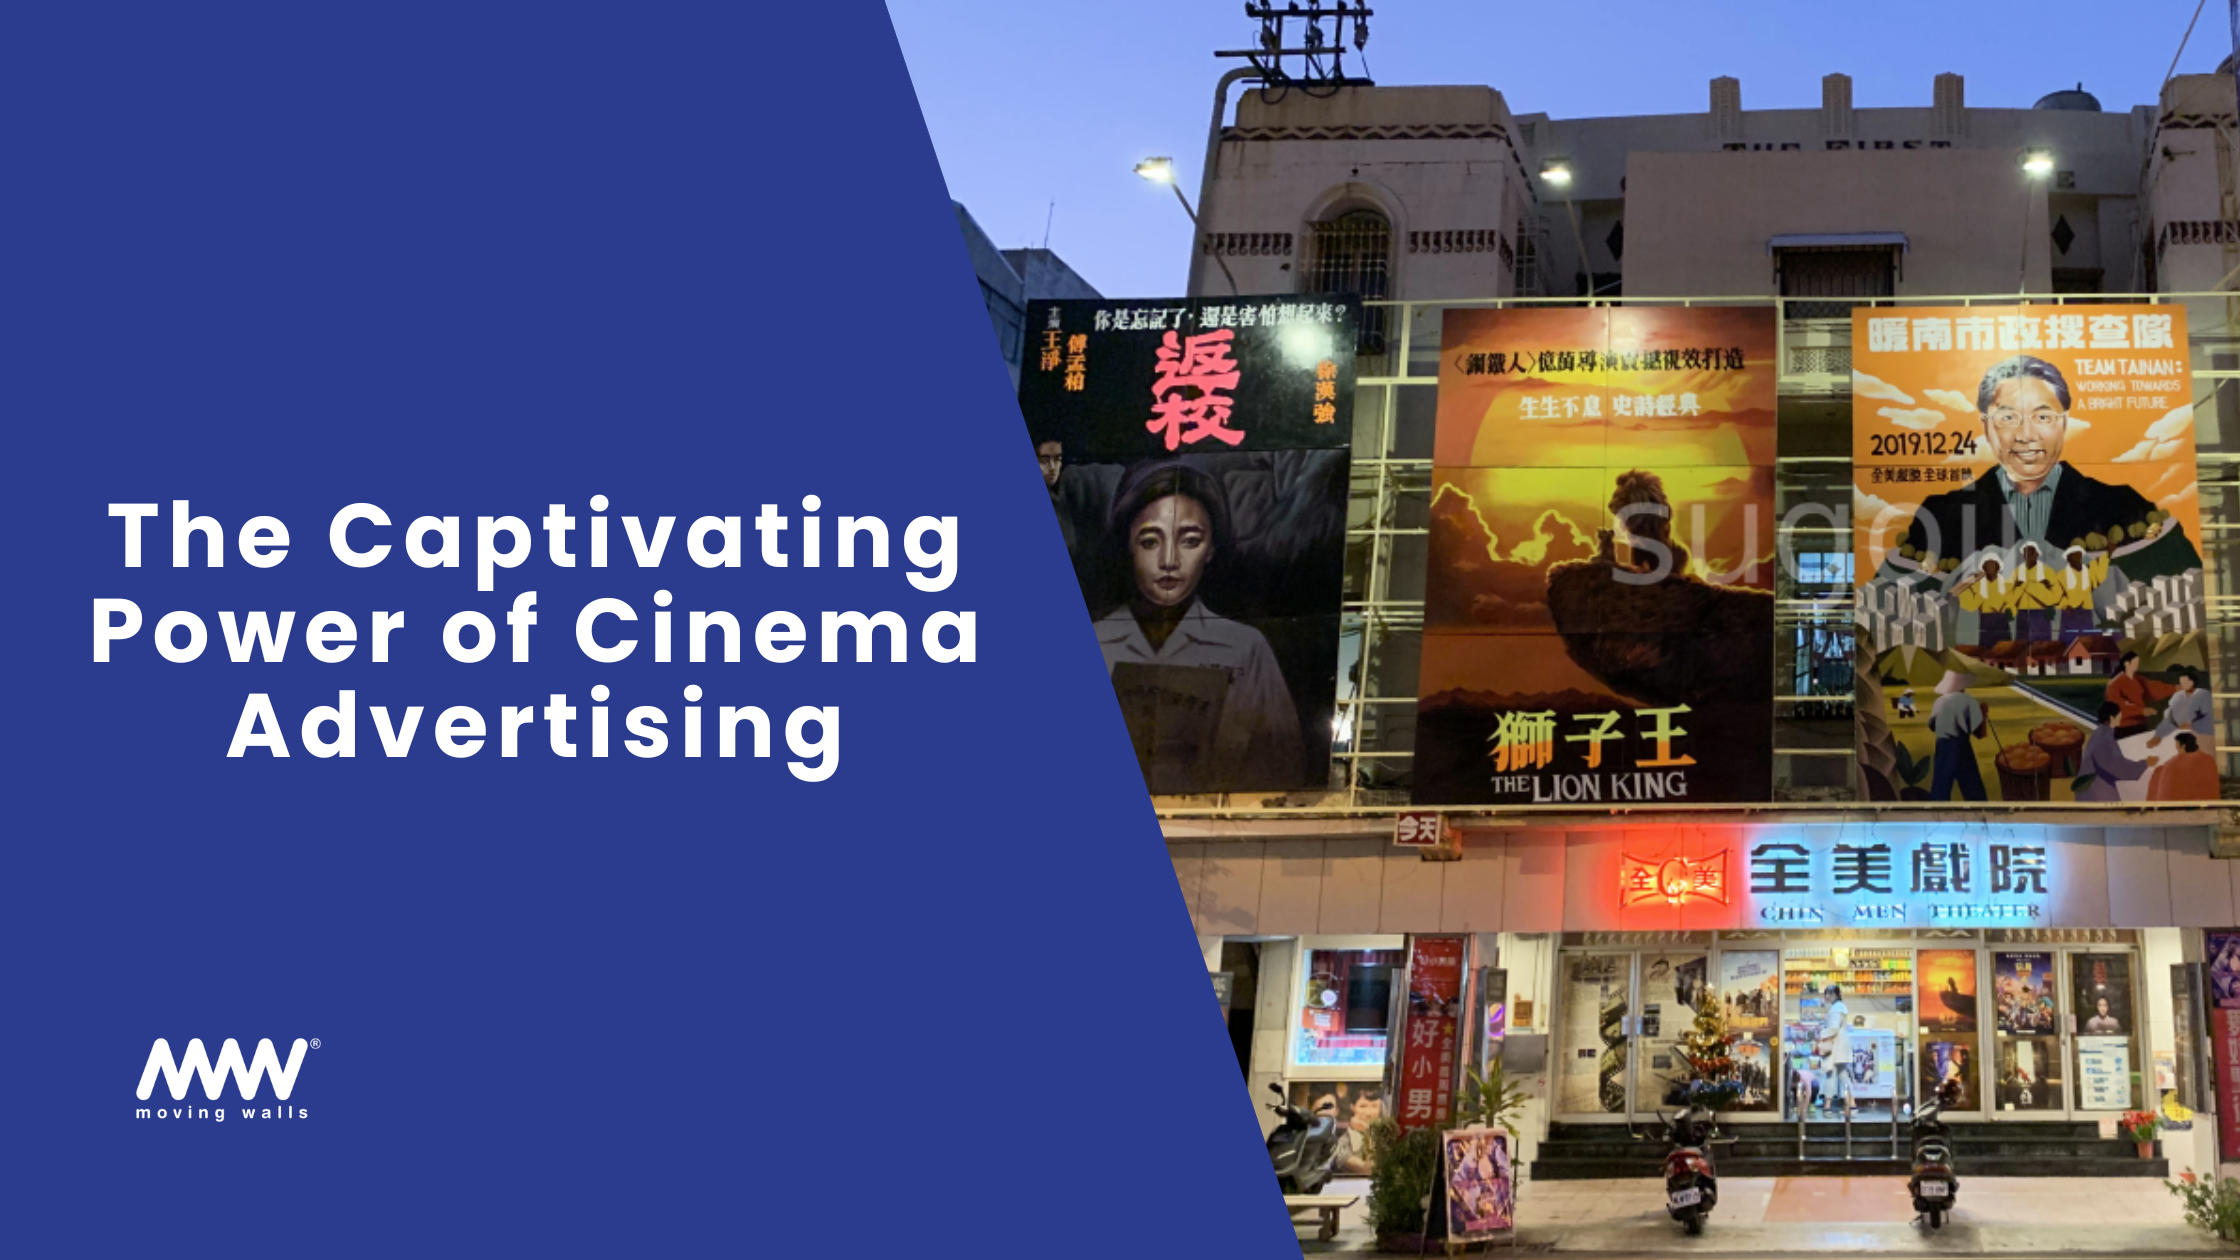 The Captivating Power of Cinema Advertising